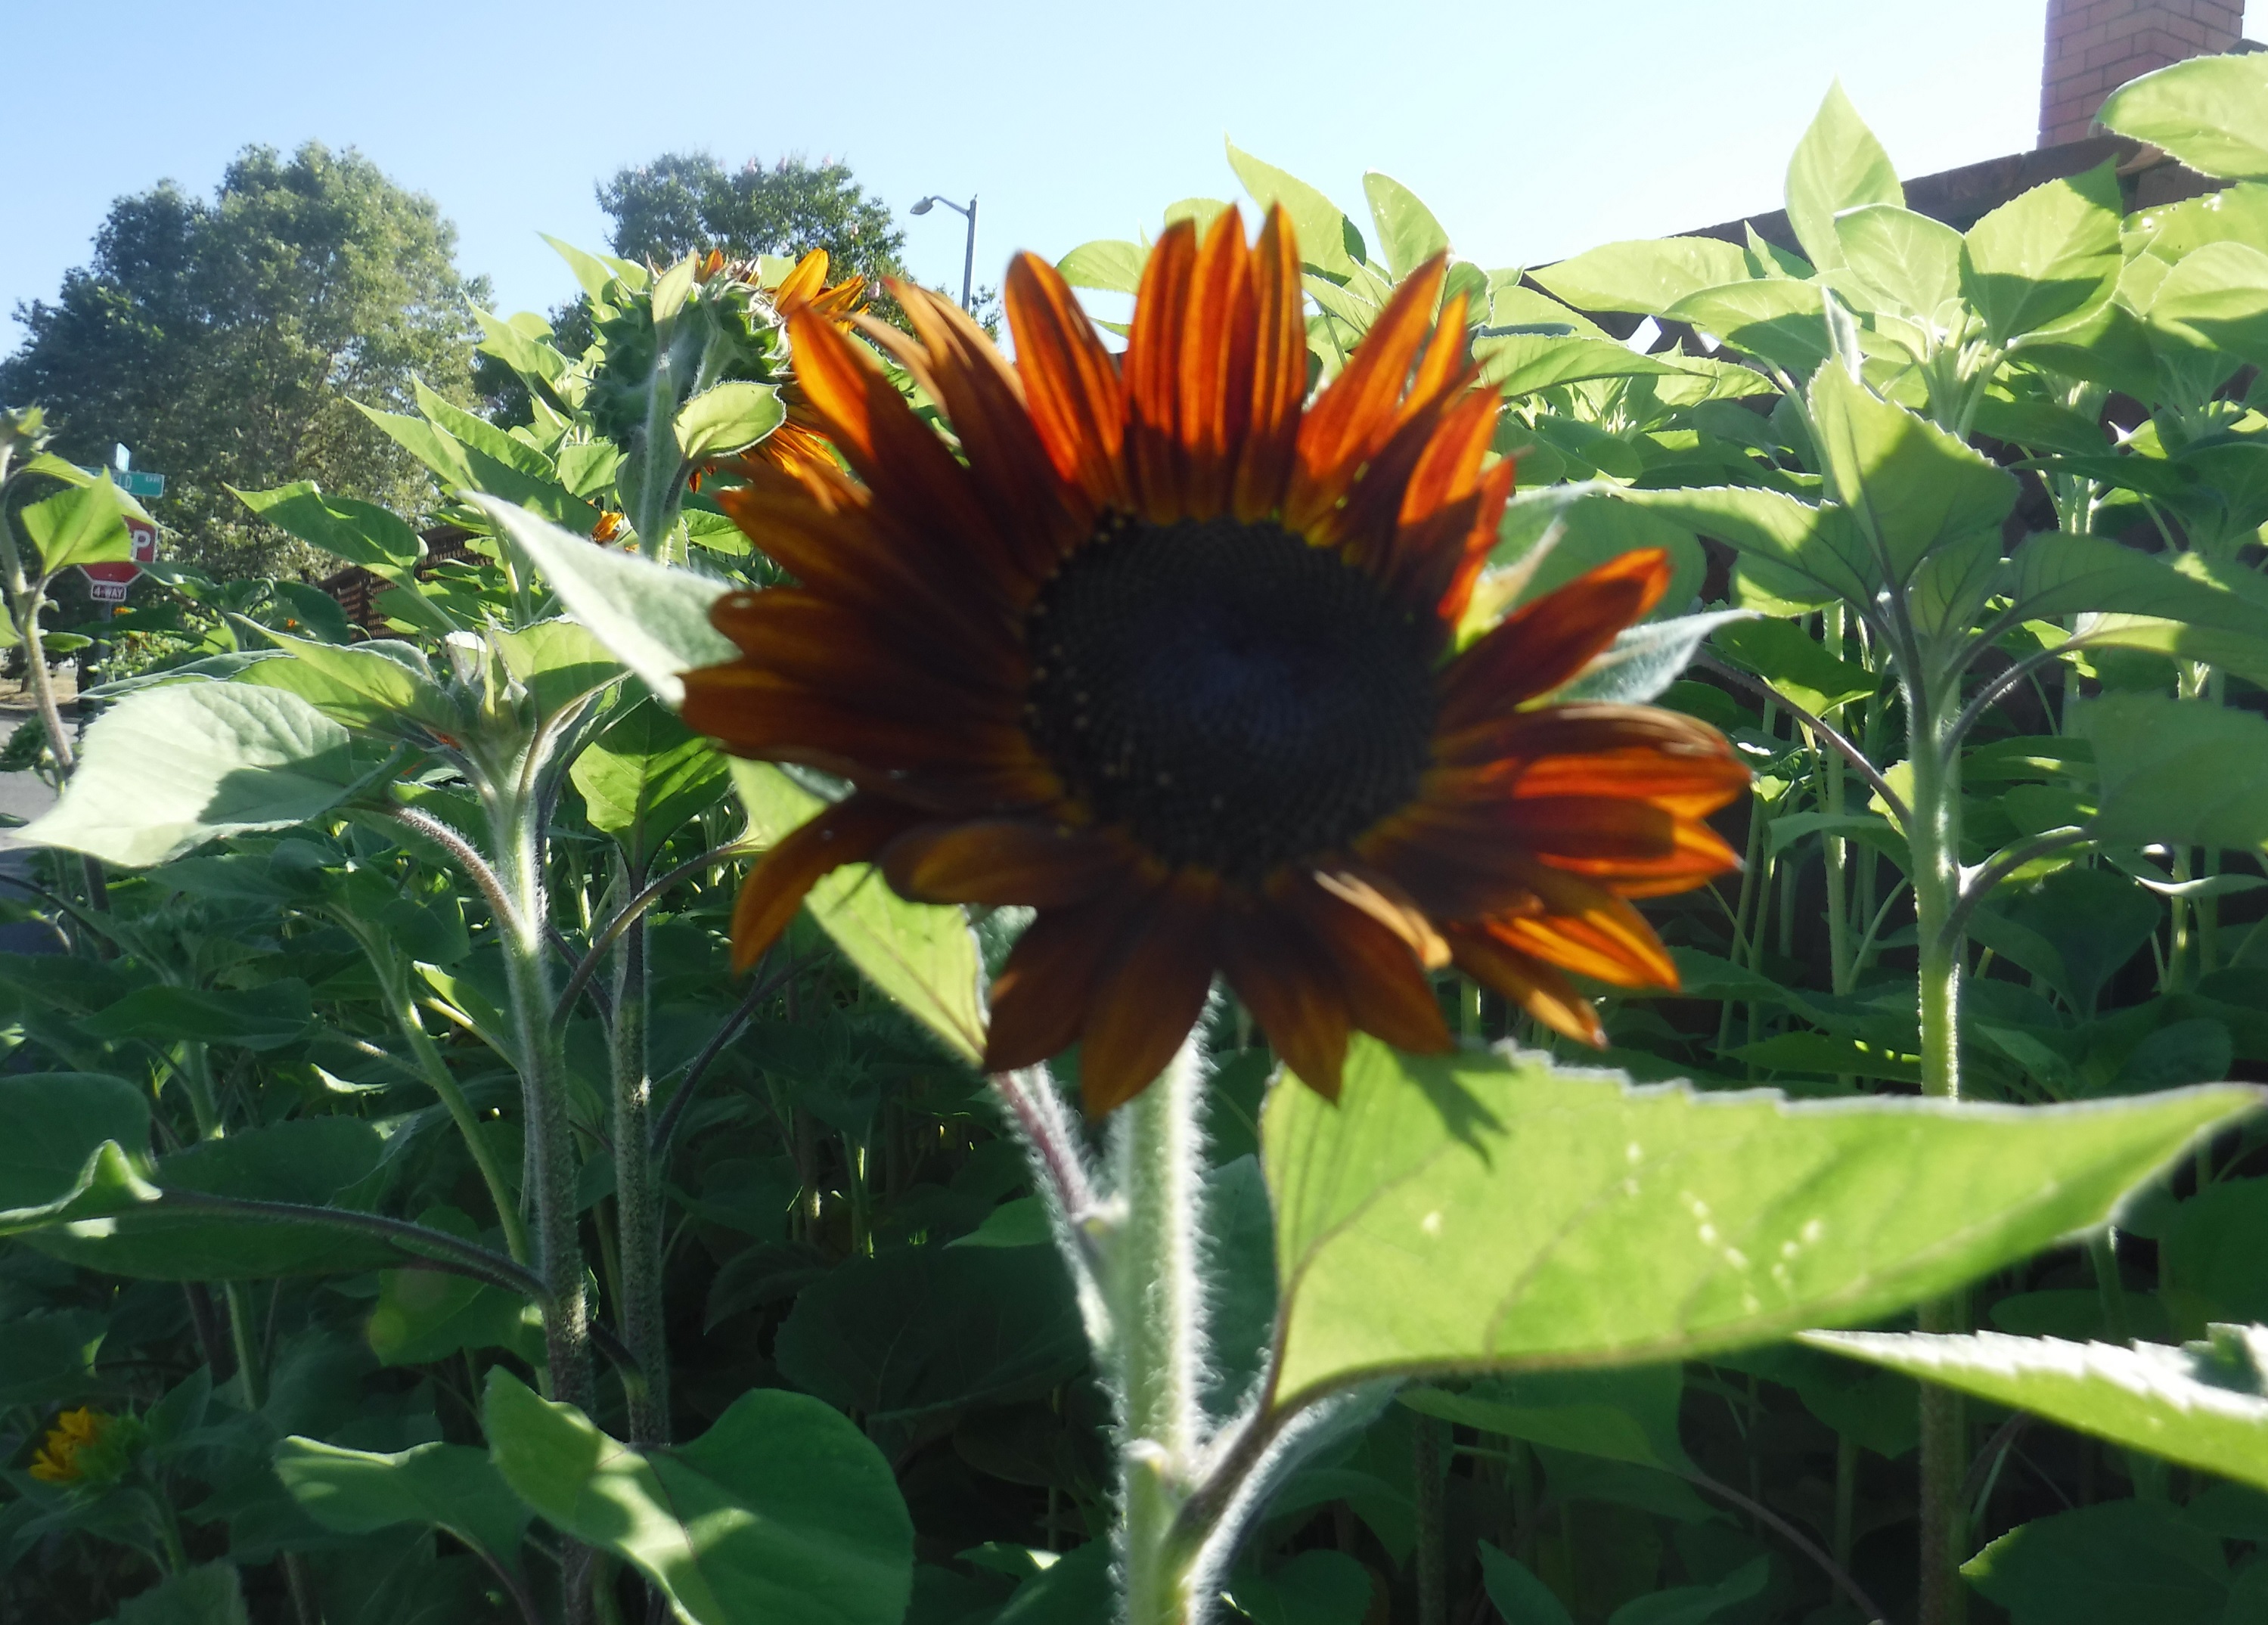 Photo taken by  me of neighbor's sunflowers